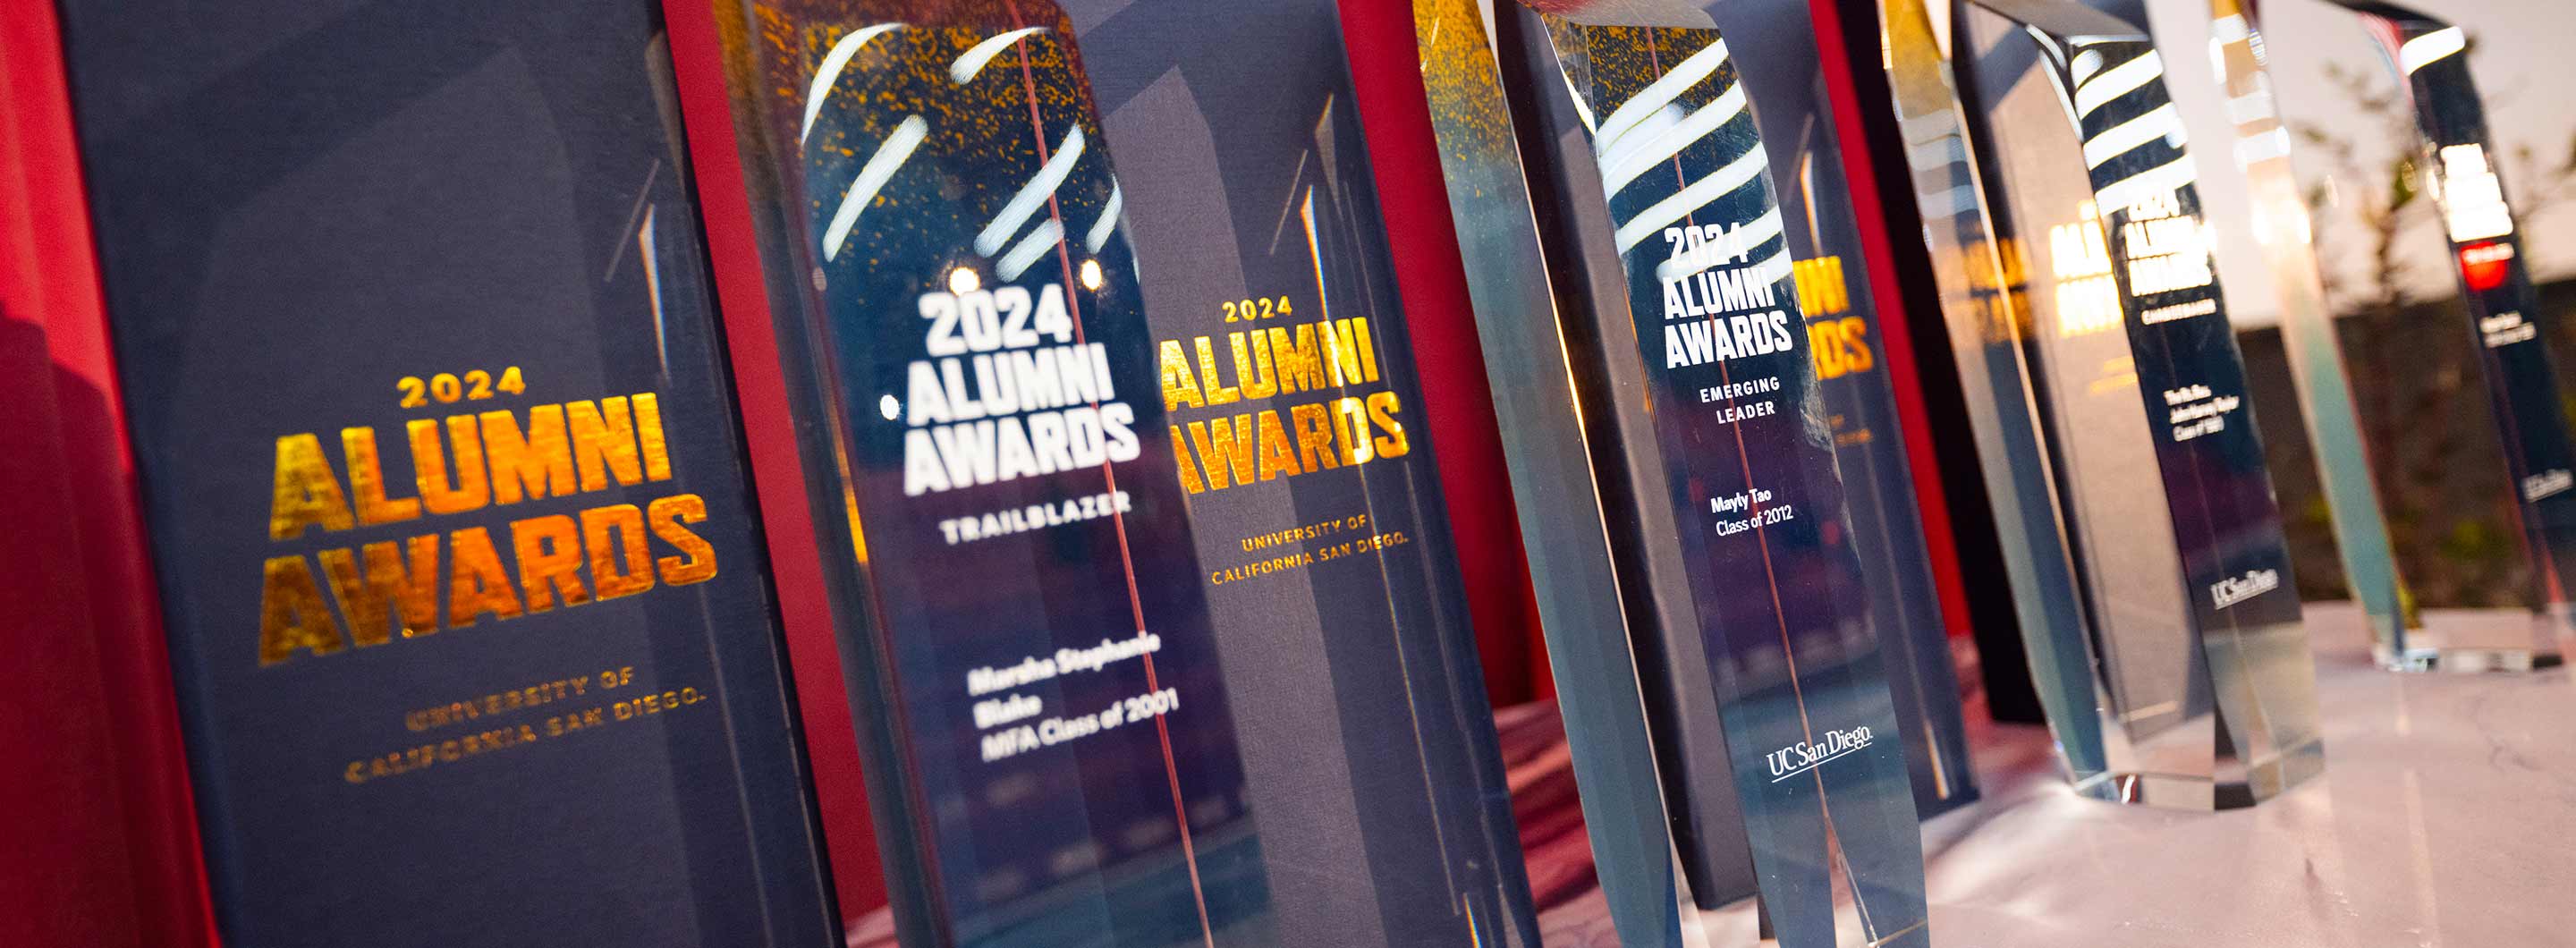 Alumni Award trophies lined up on a table